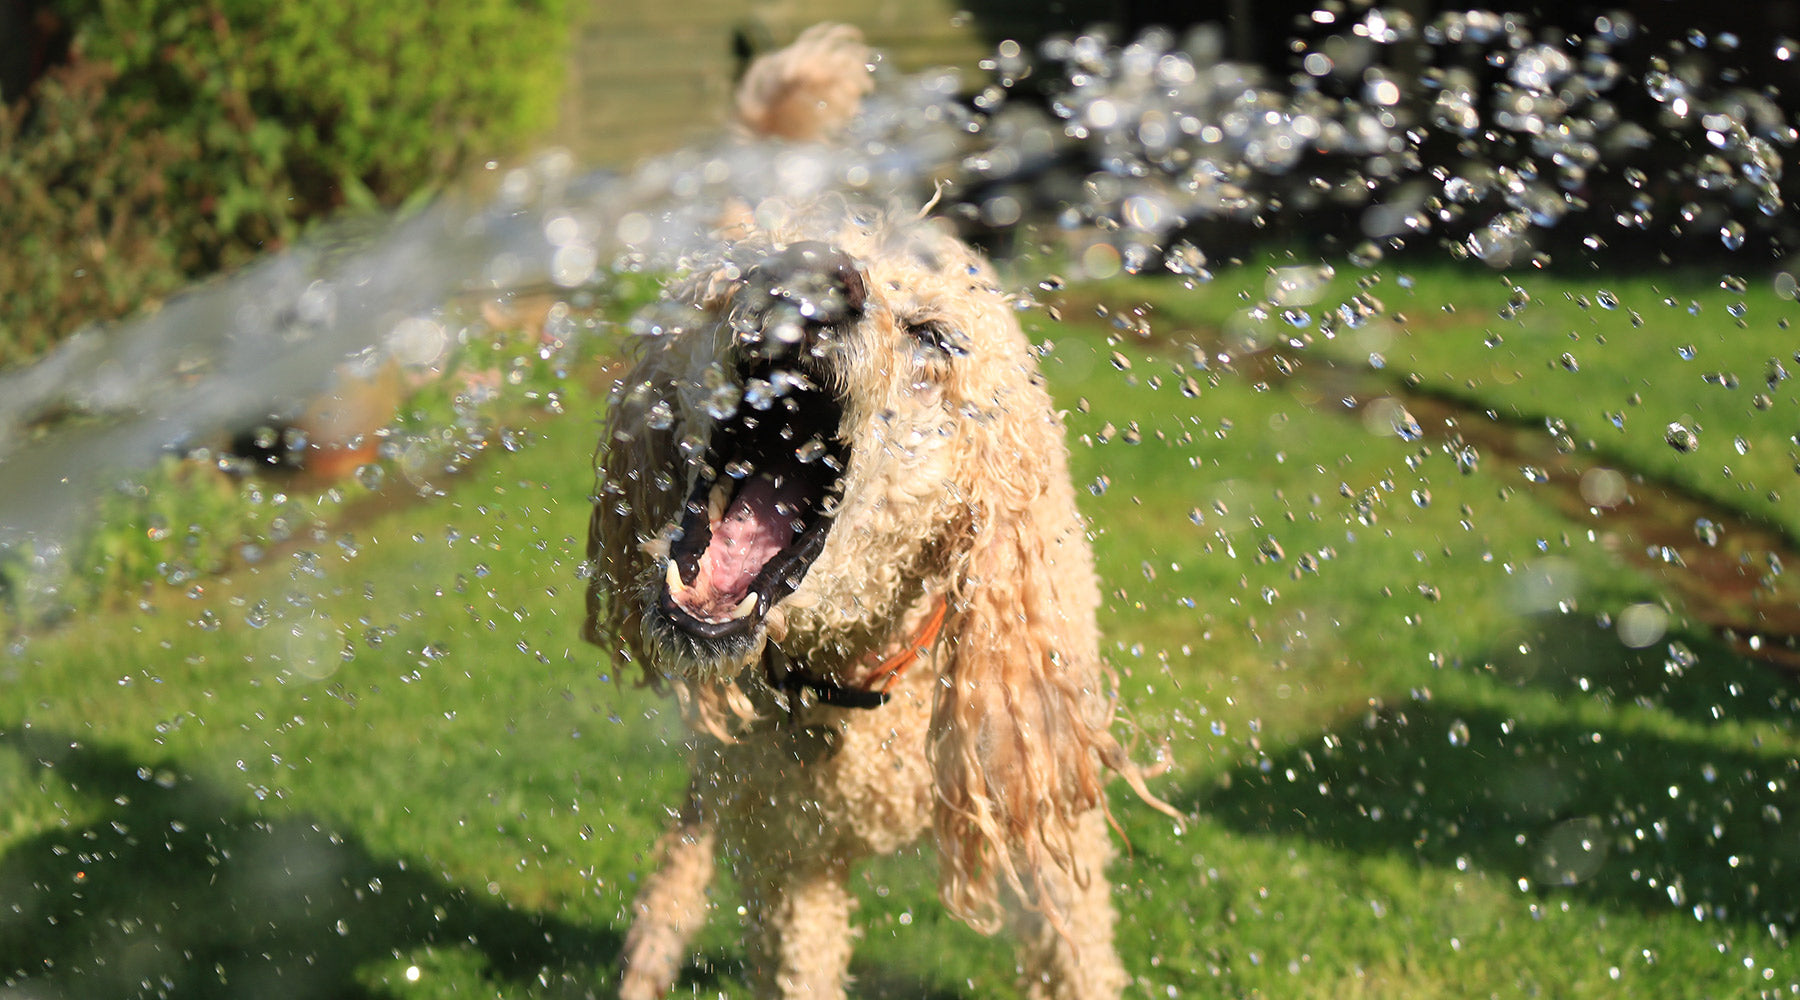 A blonde-colored dog chomping at water being sprayed from an off-screen hose at FurHaven Pet Products